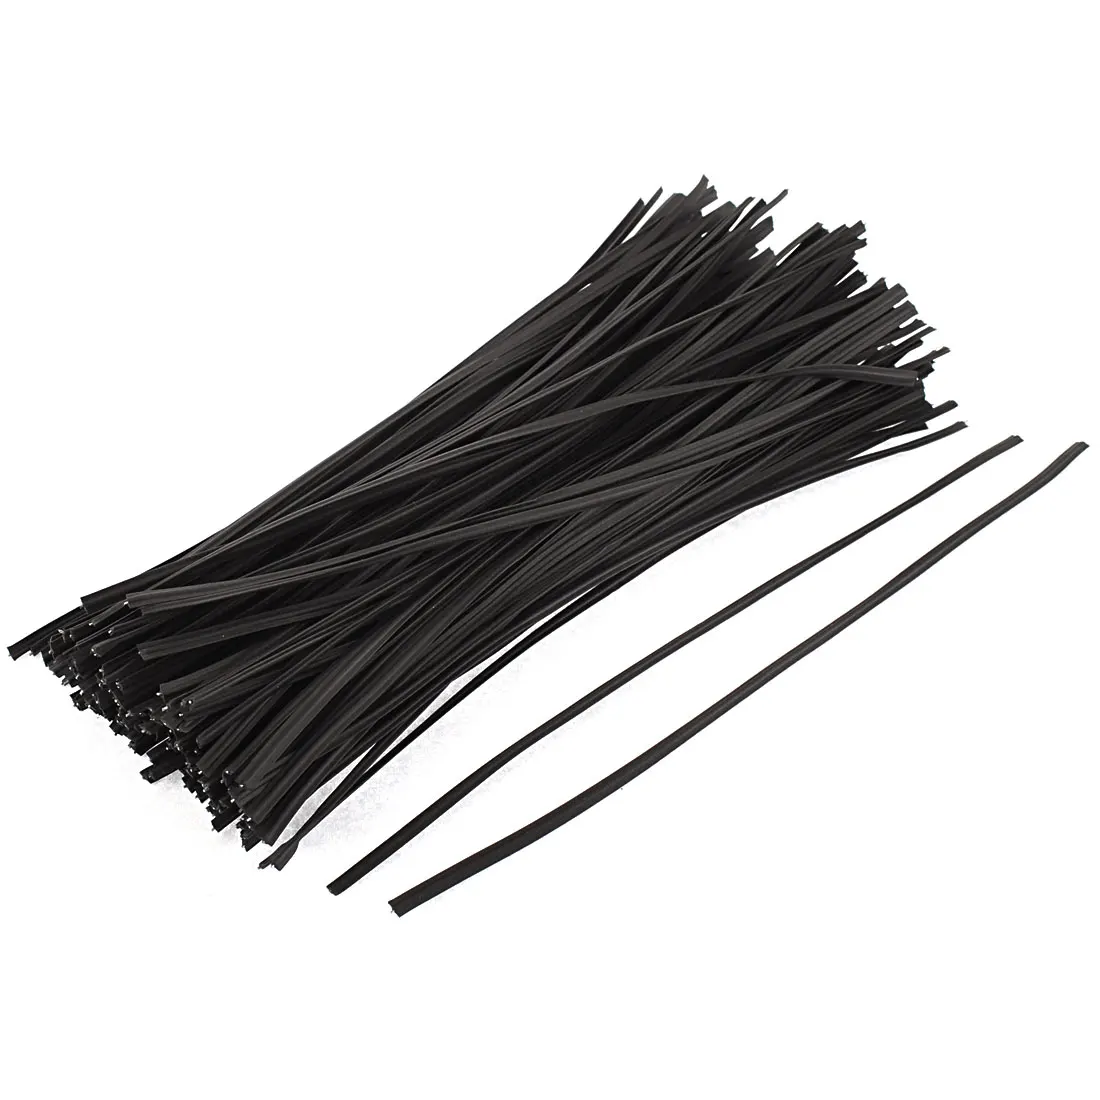 ZIP TIES FOR FASTENING CABLES & WIRES 3MM-9MM BLACK NYLON CABLE TIES 